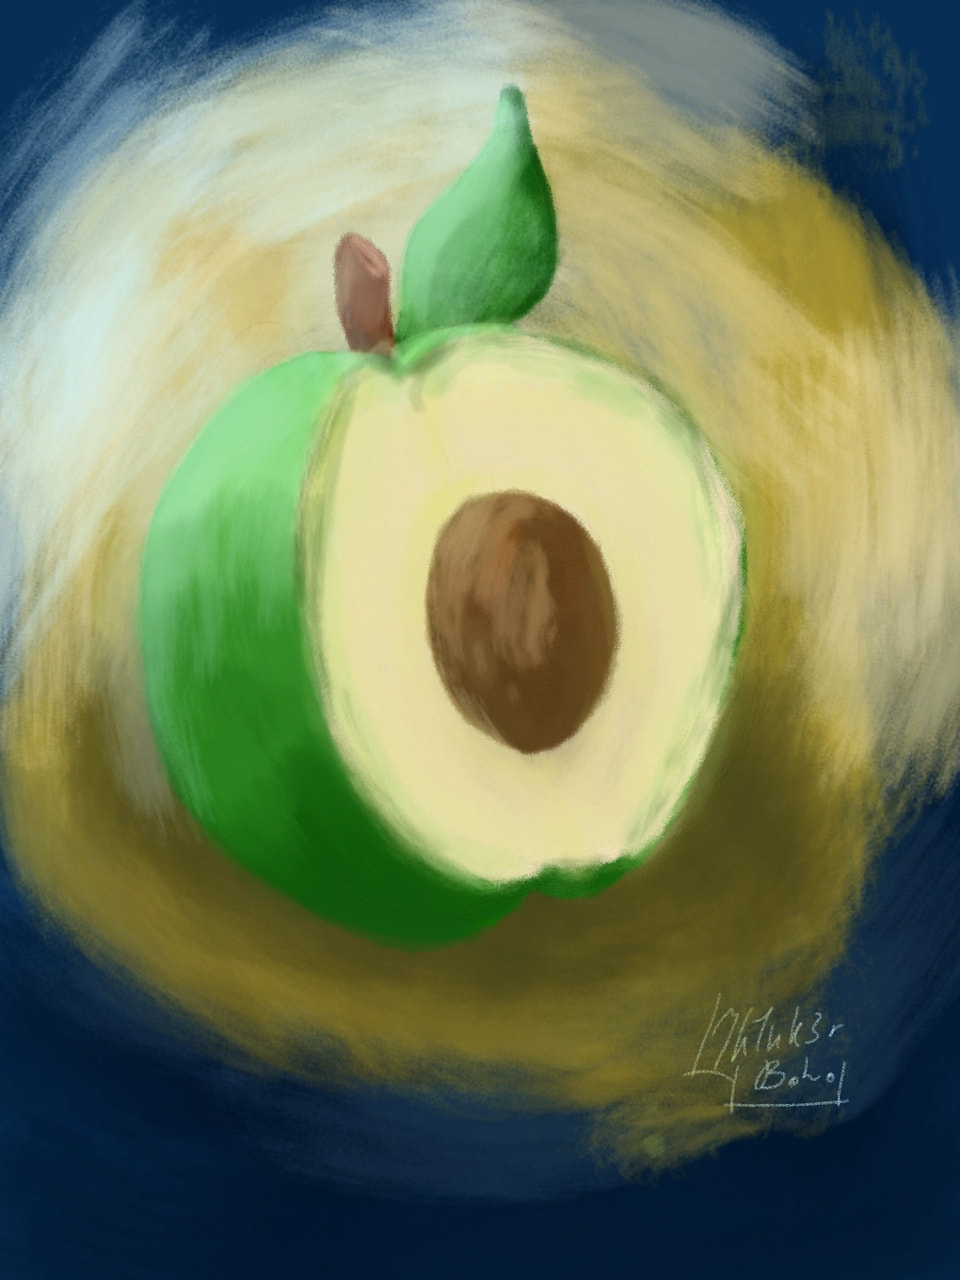 Its an 'avocado'.... Thanks. Ok its an applcado fre,,,sha va ca do #fridayswithsketch #FusionChallenge. Edit: guys... Guys thank you so much for the likes! Make sure y'all check out my profile!